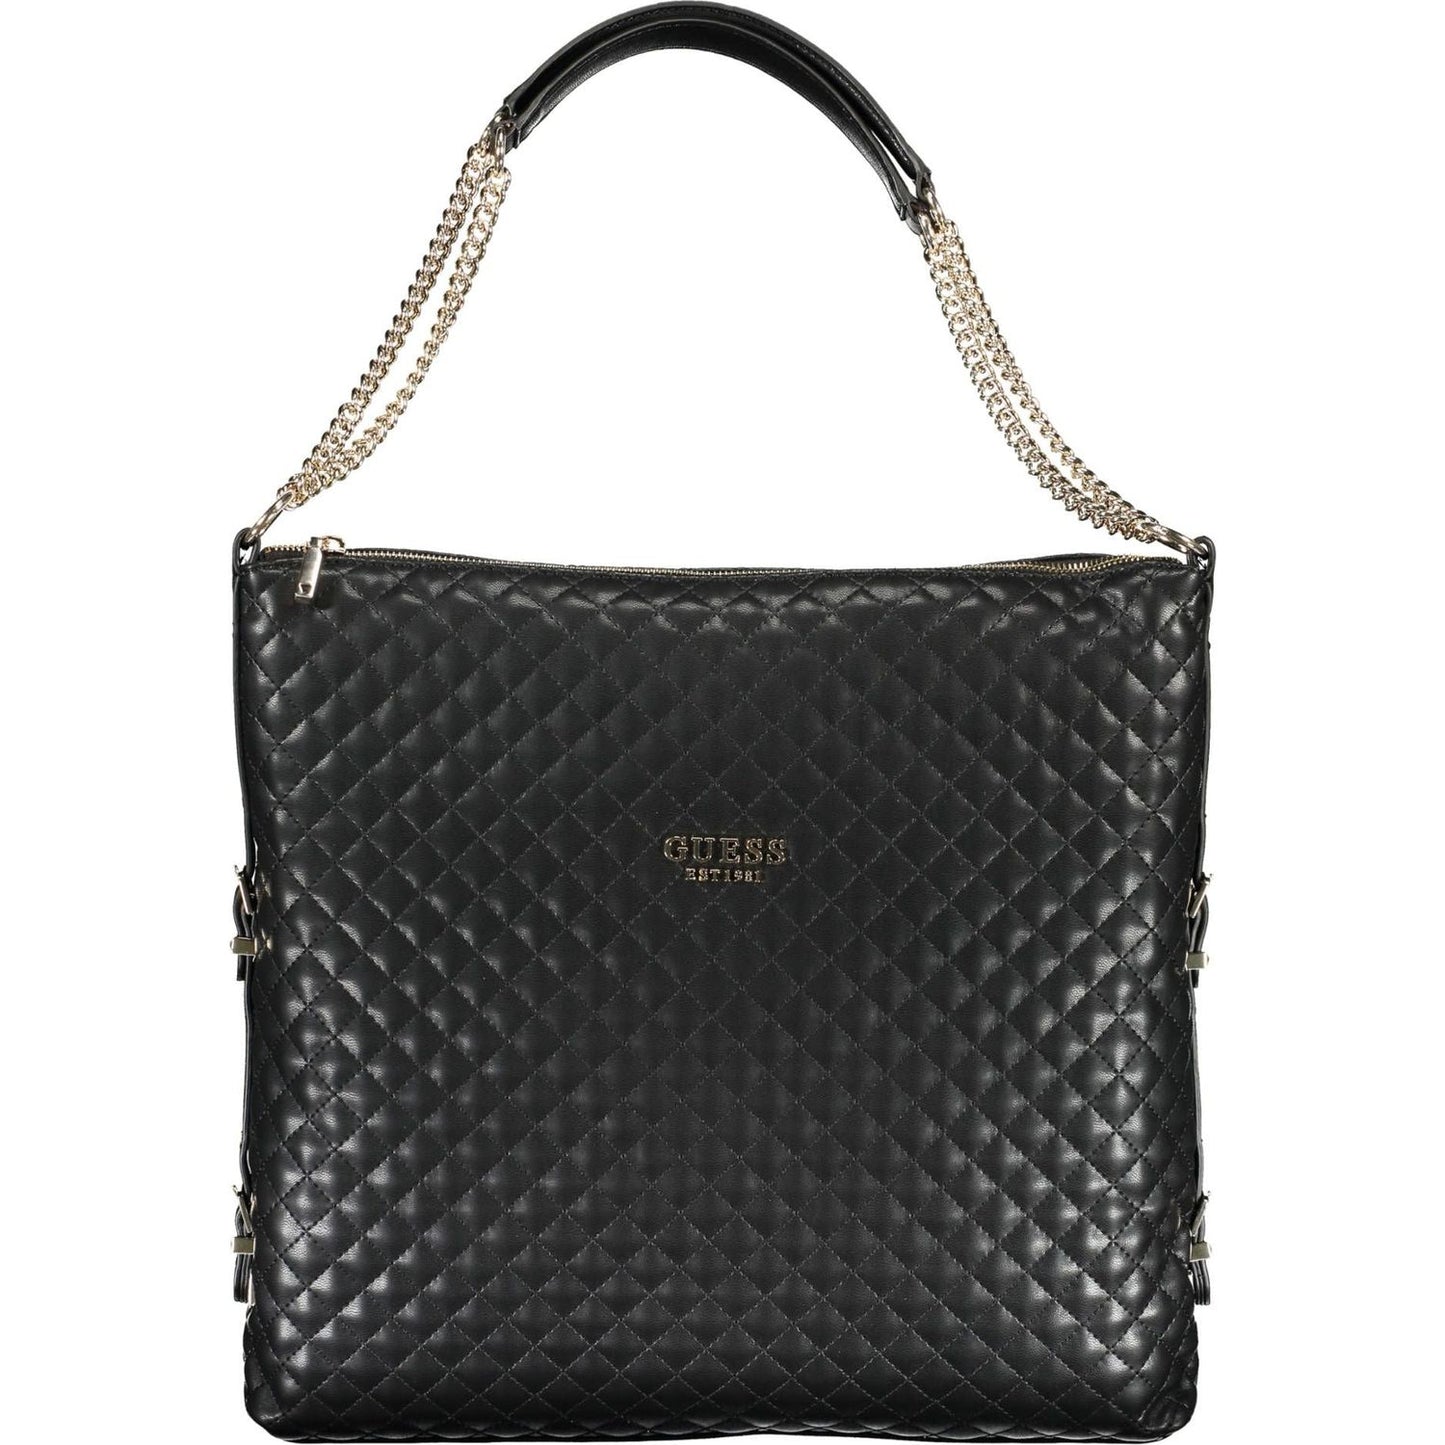 Guess Jeans Chic Two-Chain Black Shoulder Bag chic-two-chain-black-shoulder-bag